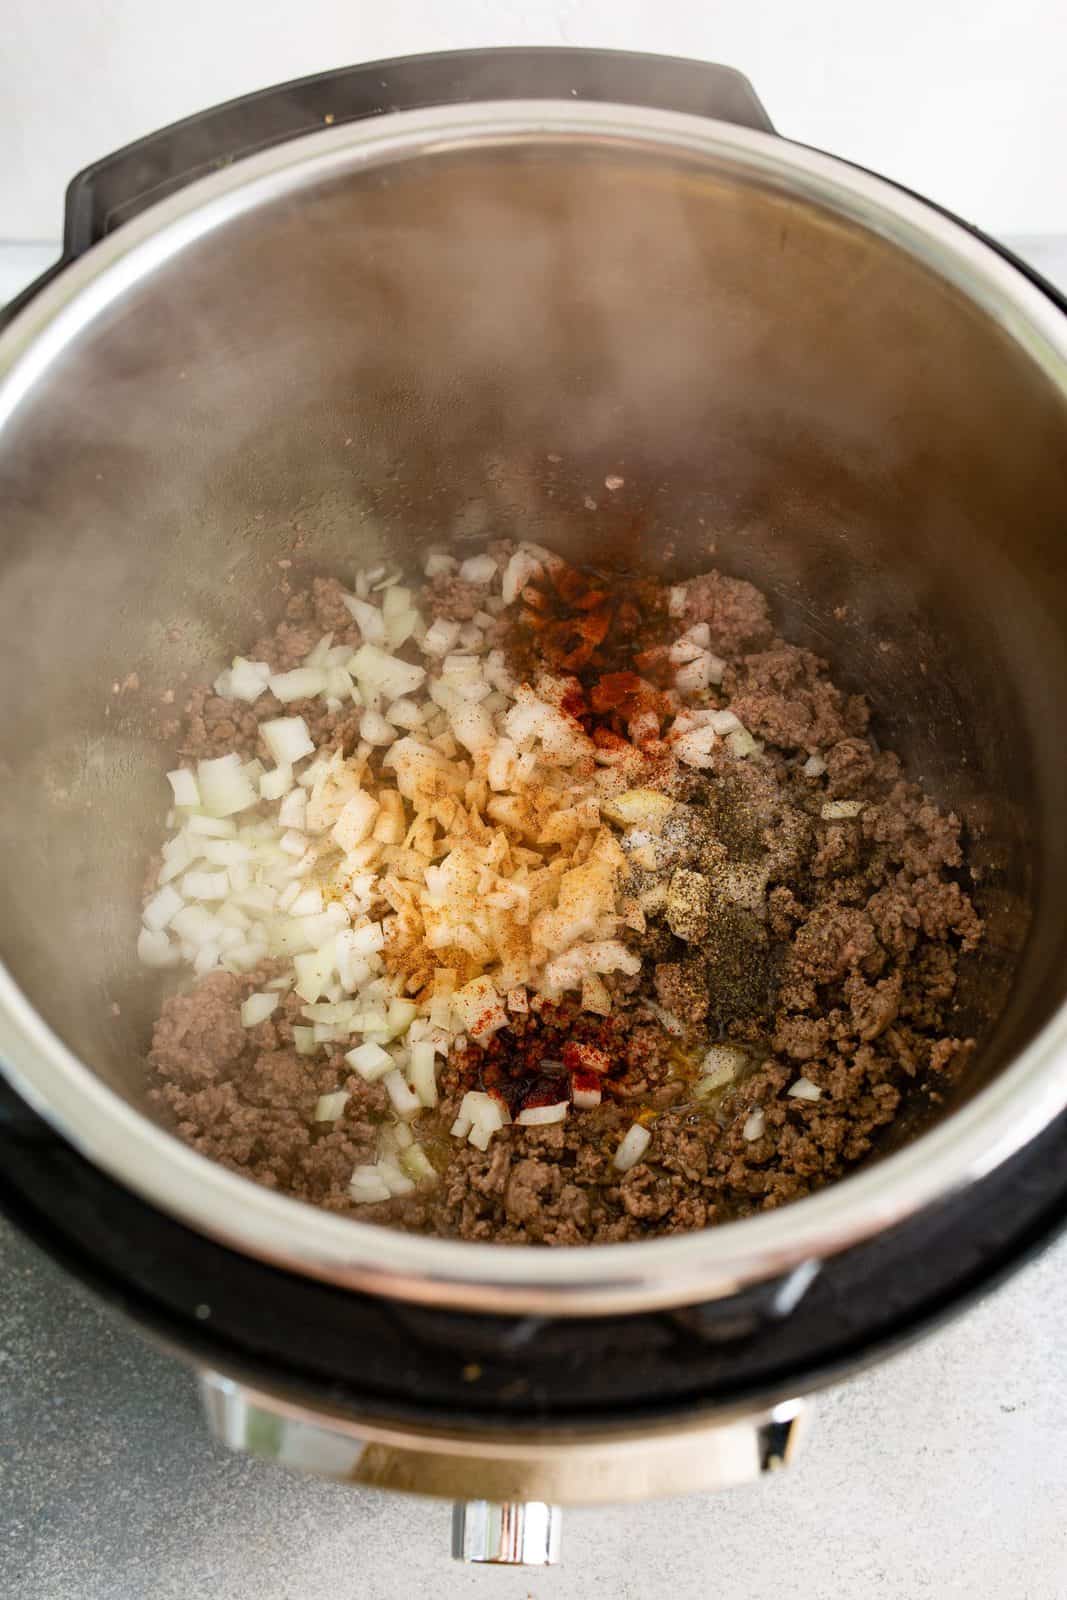 Cooked ground beef in instant pot with onions and dry seasonings added.